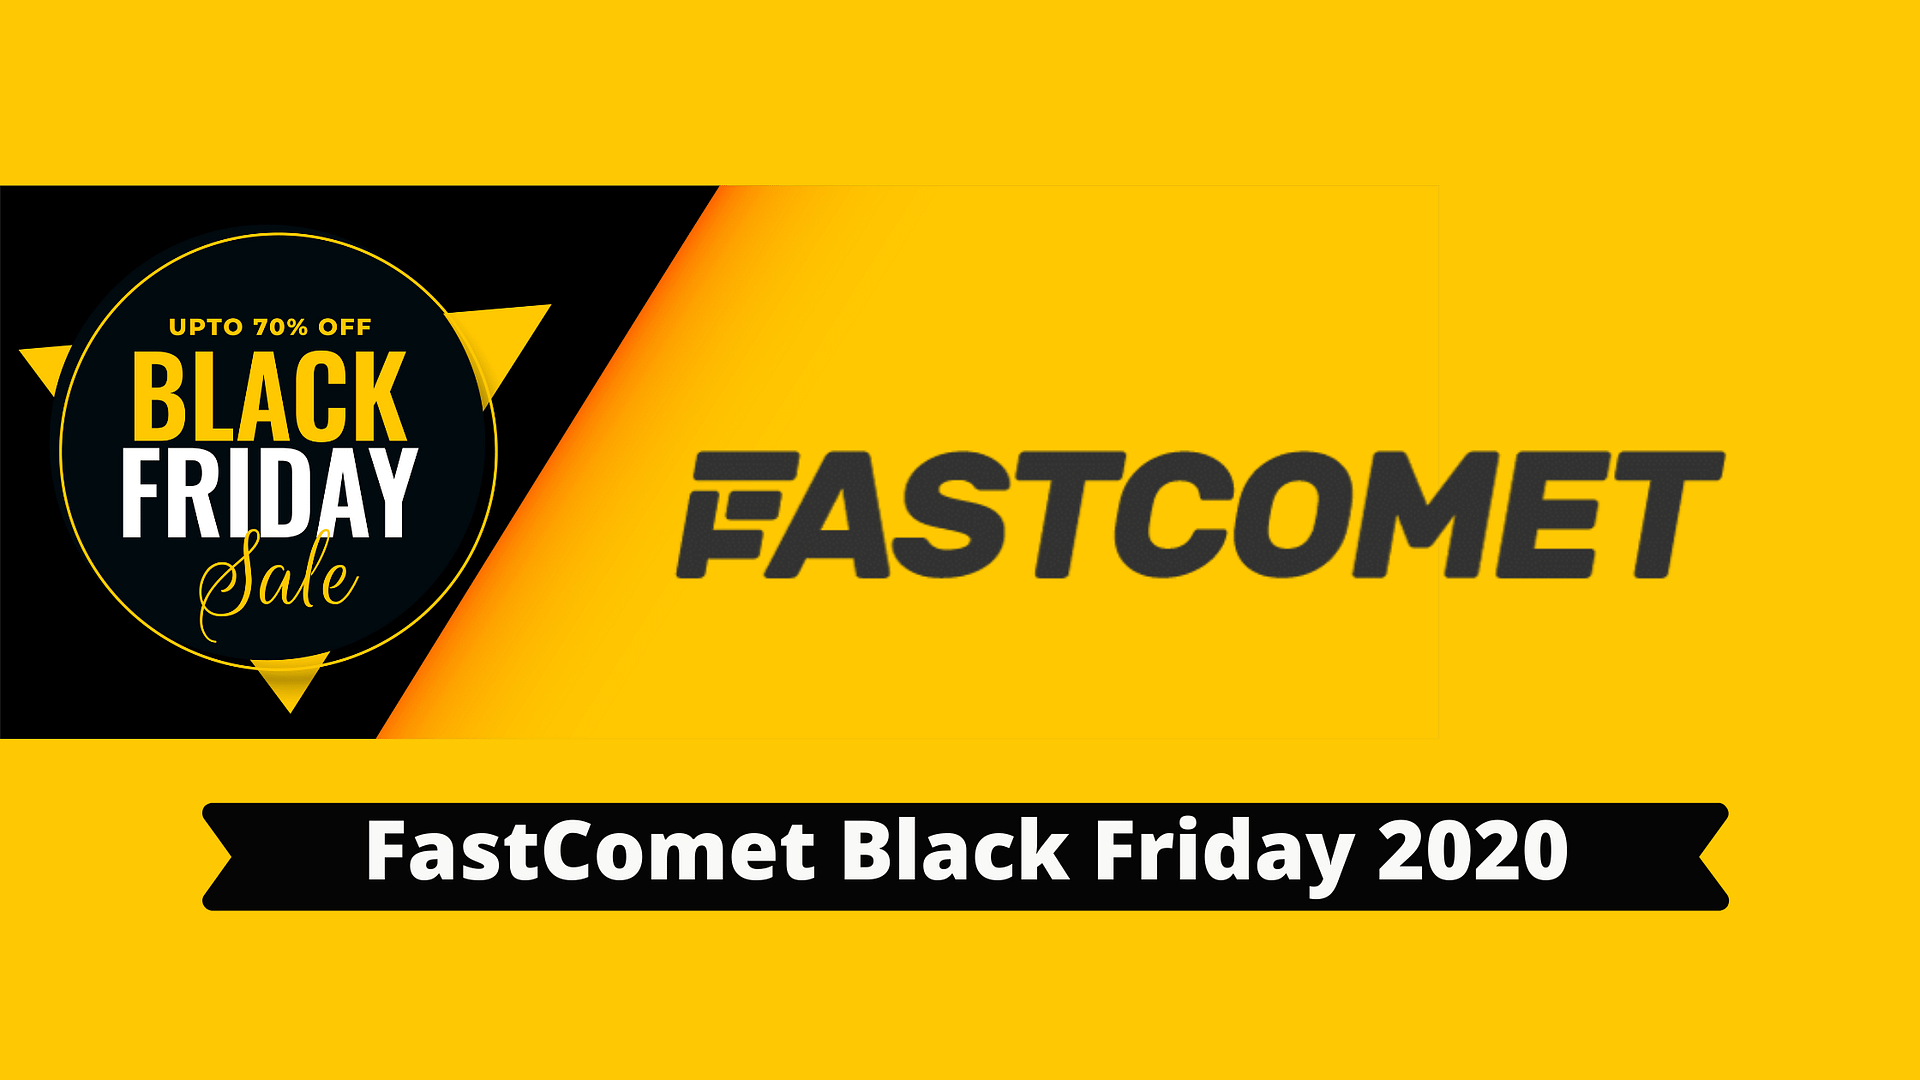 Fastcomet Black Friday 2020 Deal Up To 75 Off And Free Domain